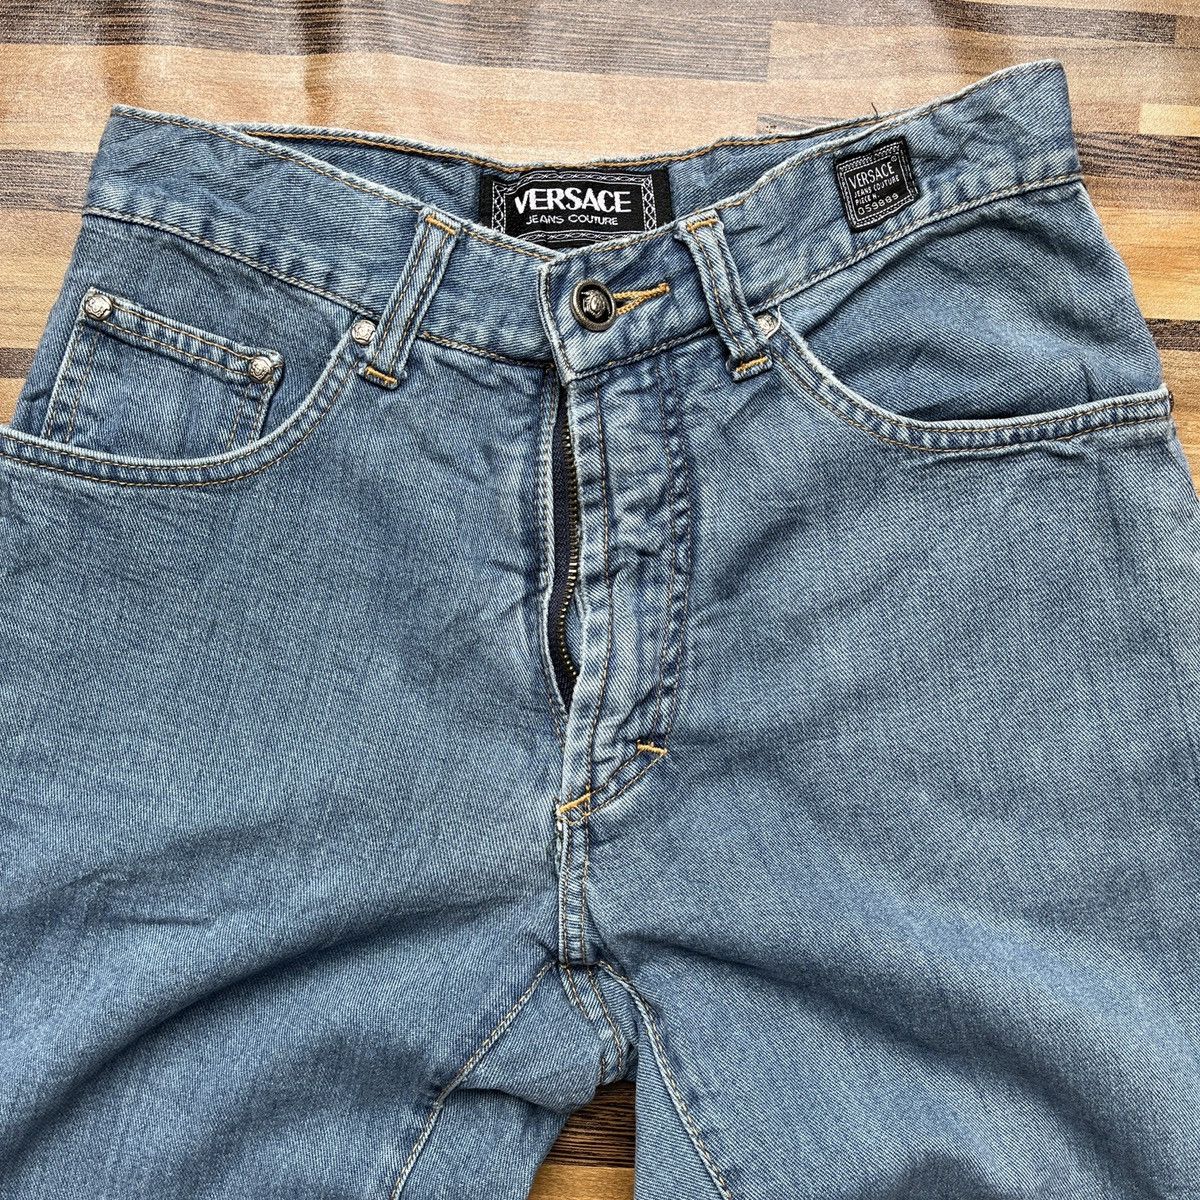 Vintage Versace Denim Jeans Made In Italy - 5